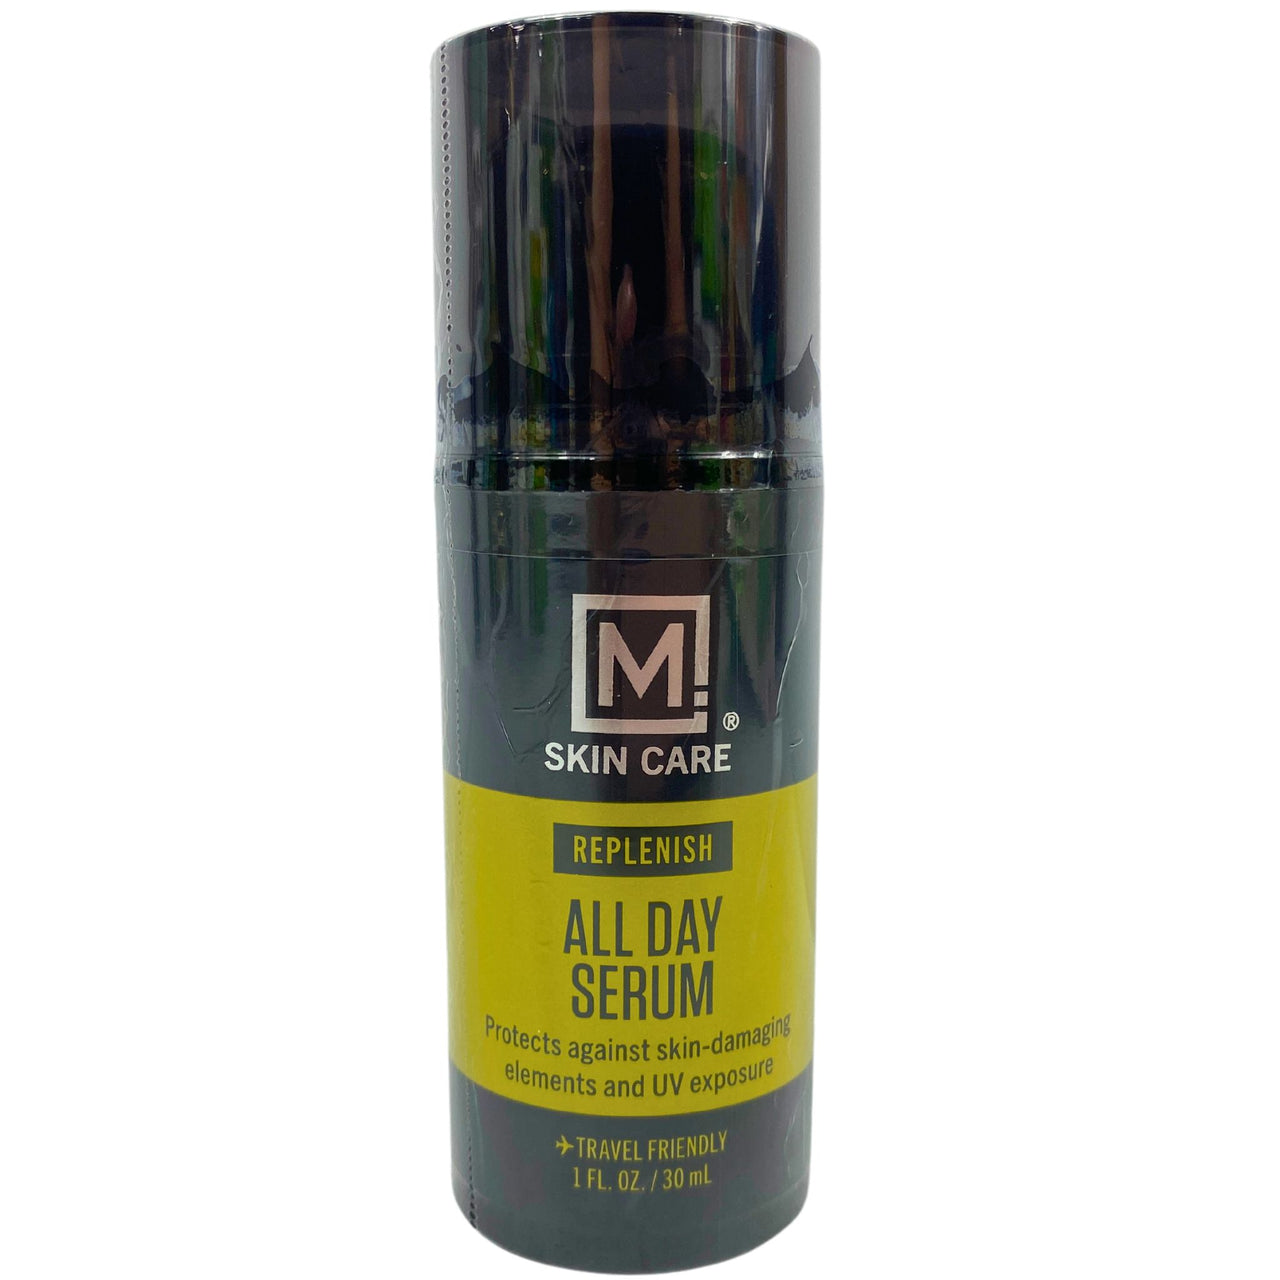 M SKIN CARE Replenish All Day Serum Protects Skin